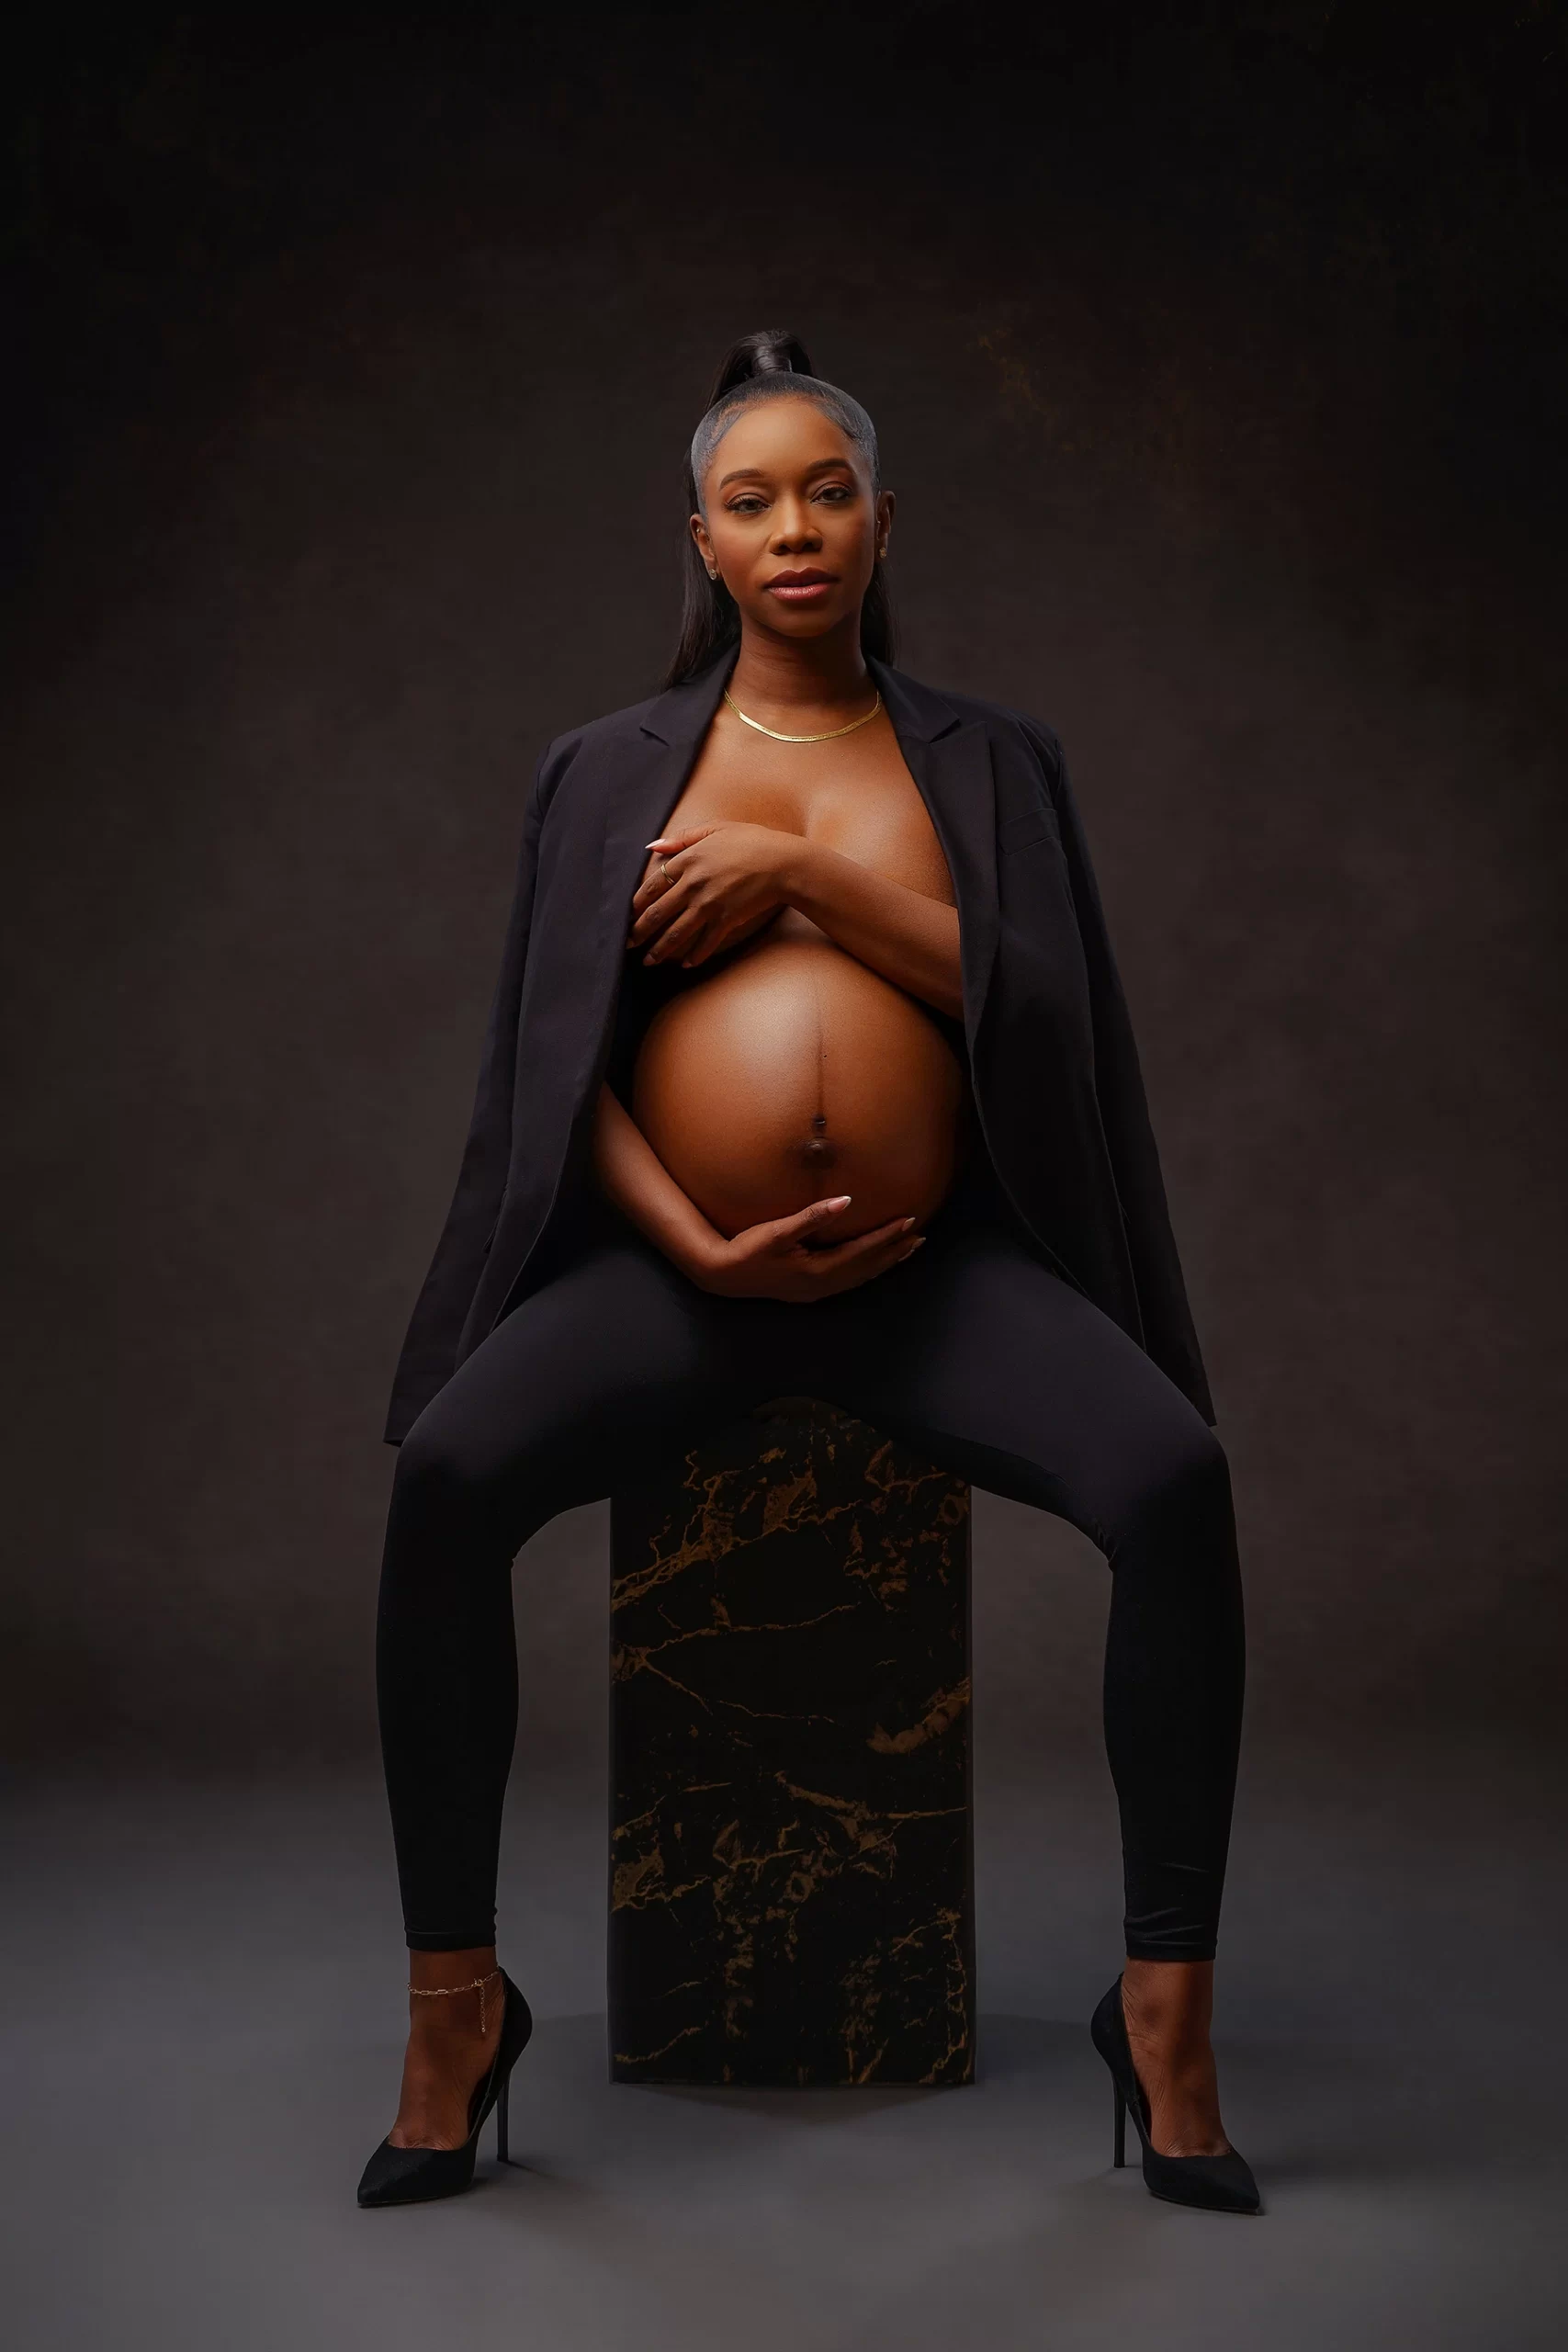 When your MiniMe takes over your Maternity Photoshoot… #swipeleft